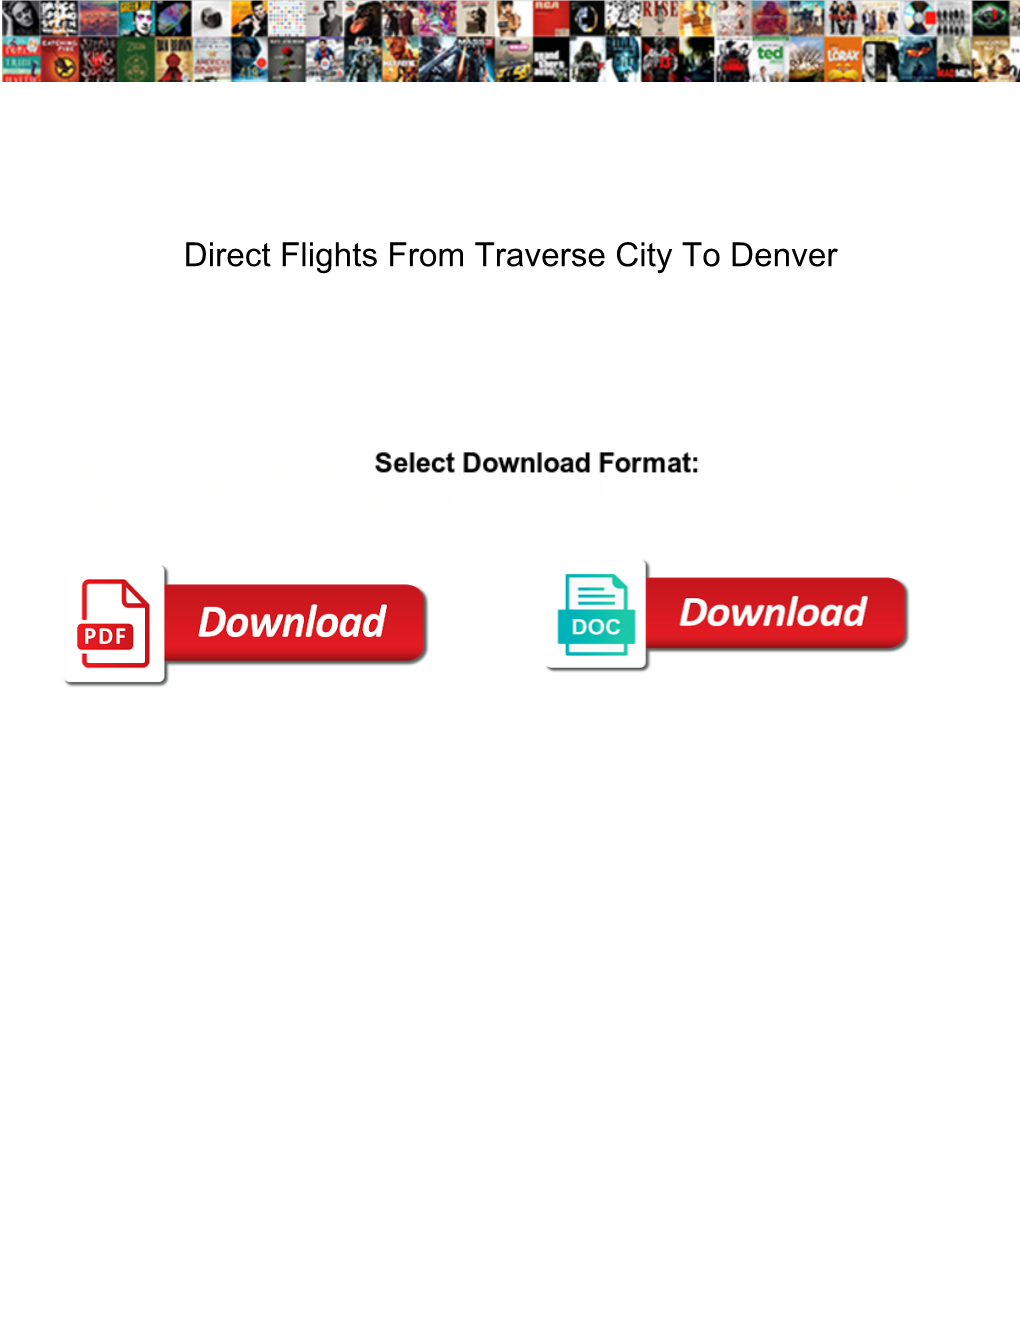 Direct Flights from Traverse City to Denver